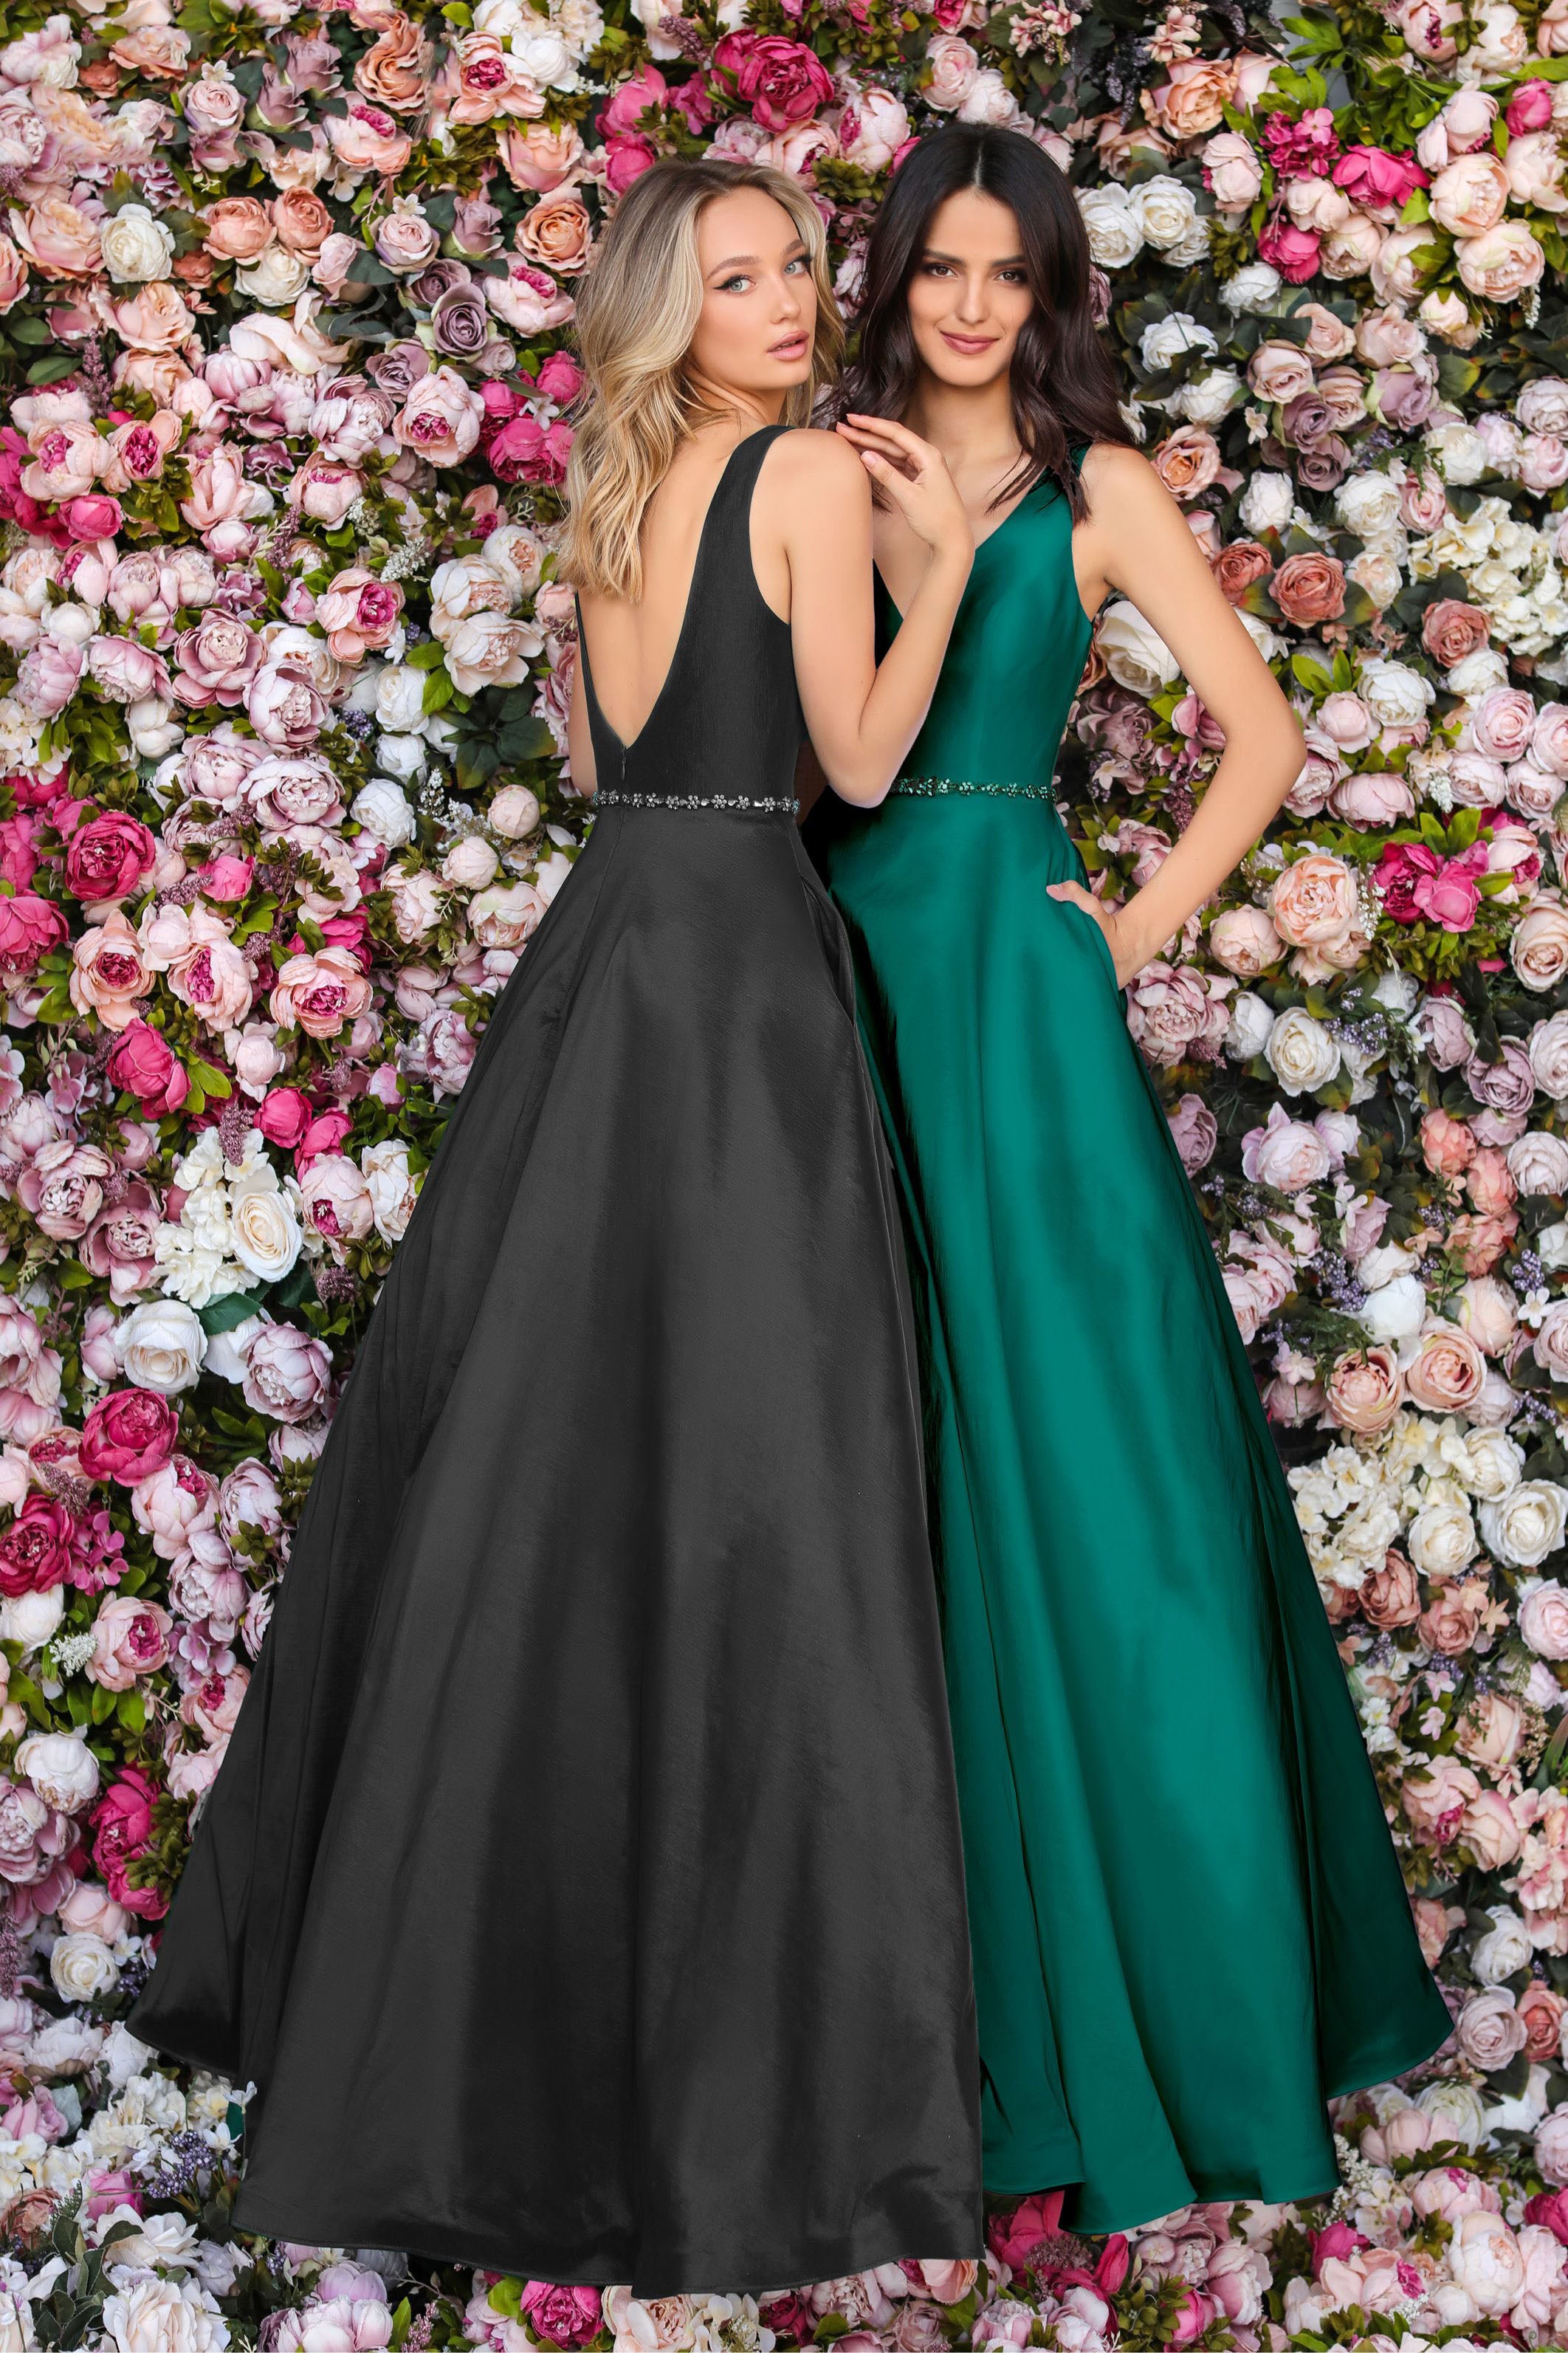 Clarisse Dress 8063 Satin Beaded A-Line Gown | Prom 2020| 3 Colors